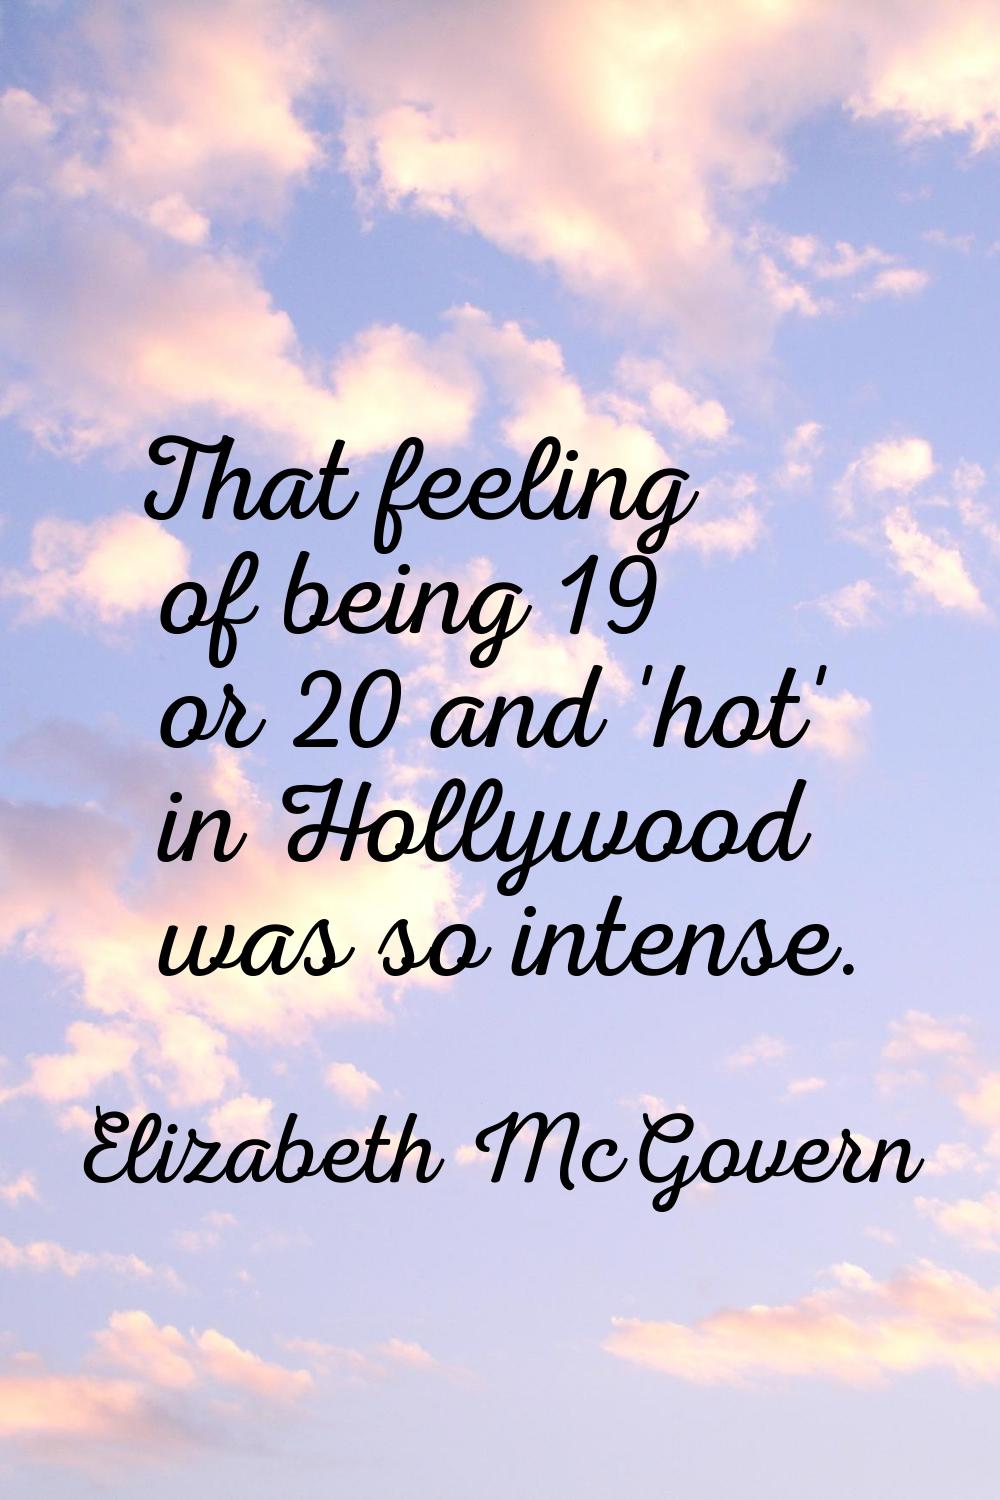 That feeling of being 19 or 20 and 'hot' in Hollywood was so intense.